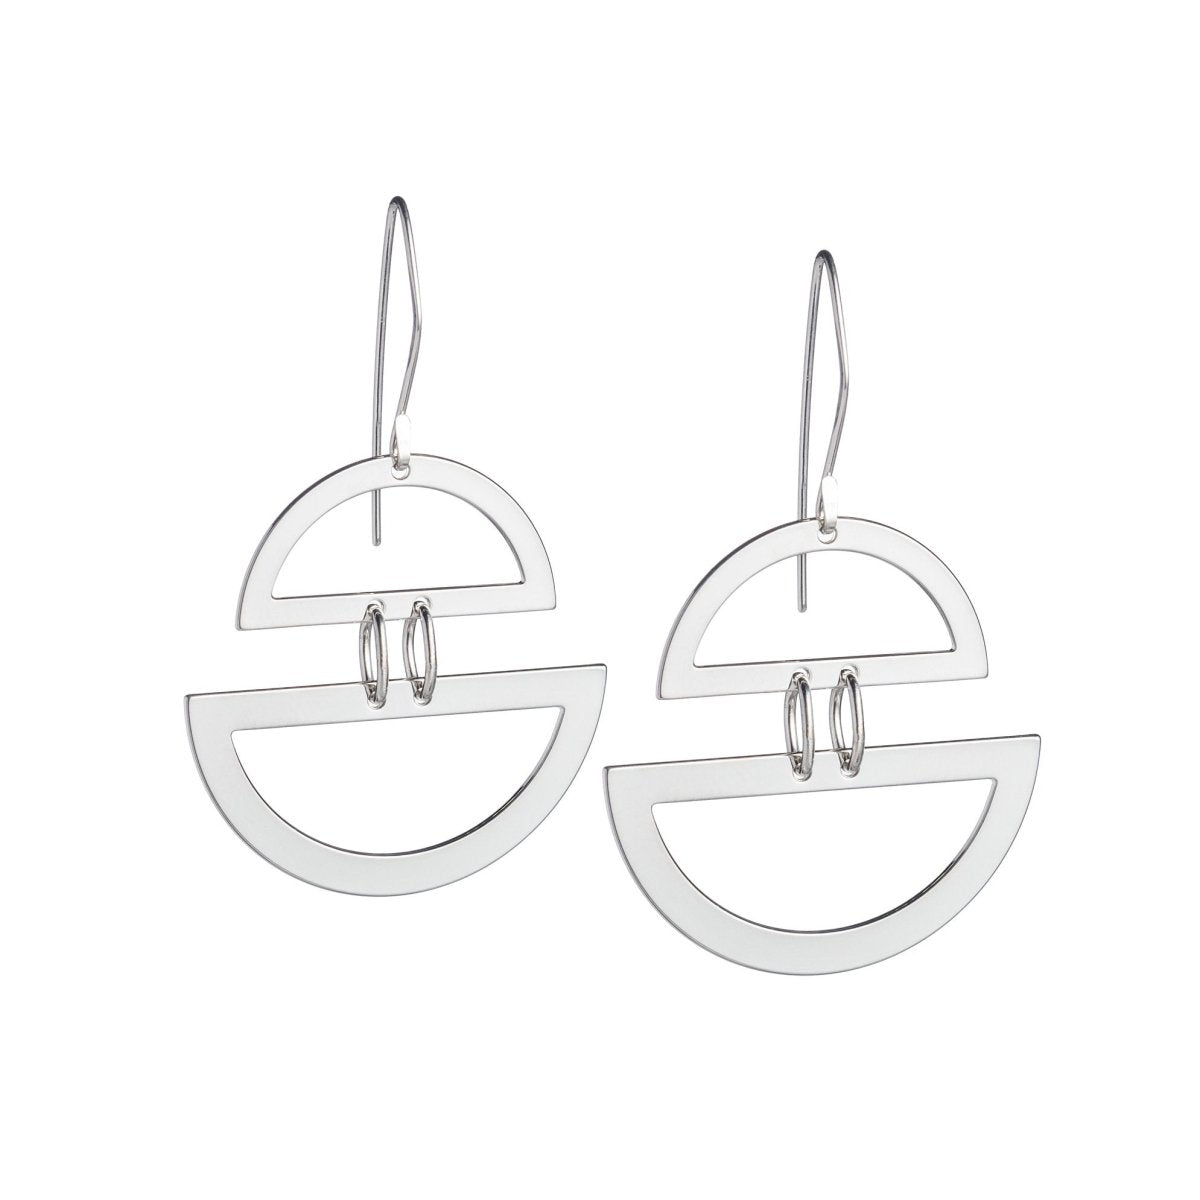 Modern, lightweight, polished sterling silver semi-circle shapes, joined in the middle by two sterling silver rings, and dangling from hand-shaped sterling silver earring wires. Hand-crafted in Portland, Oregon.